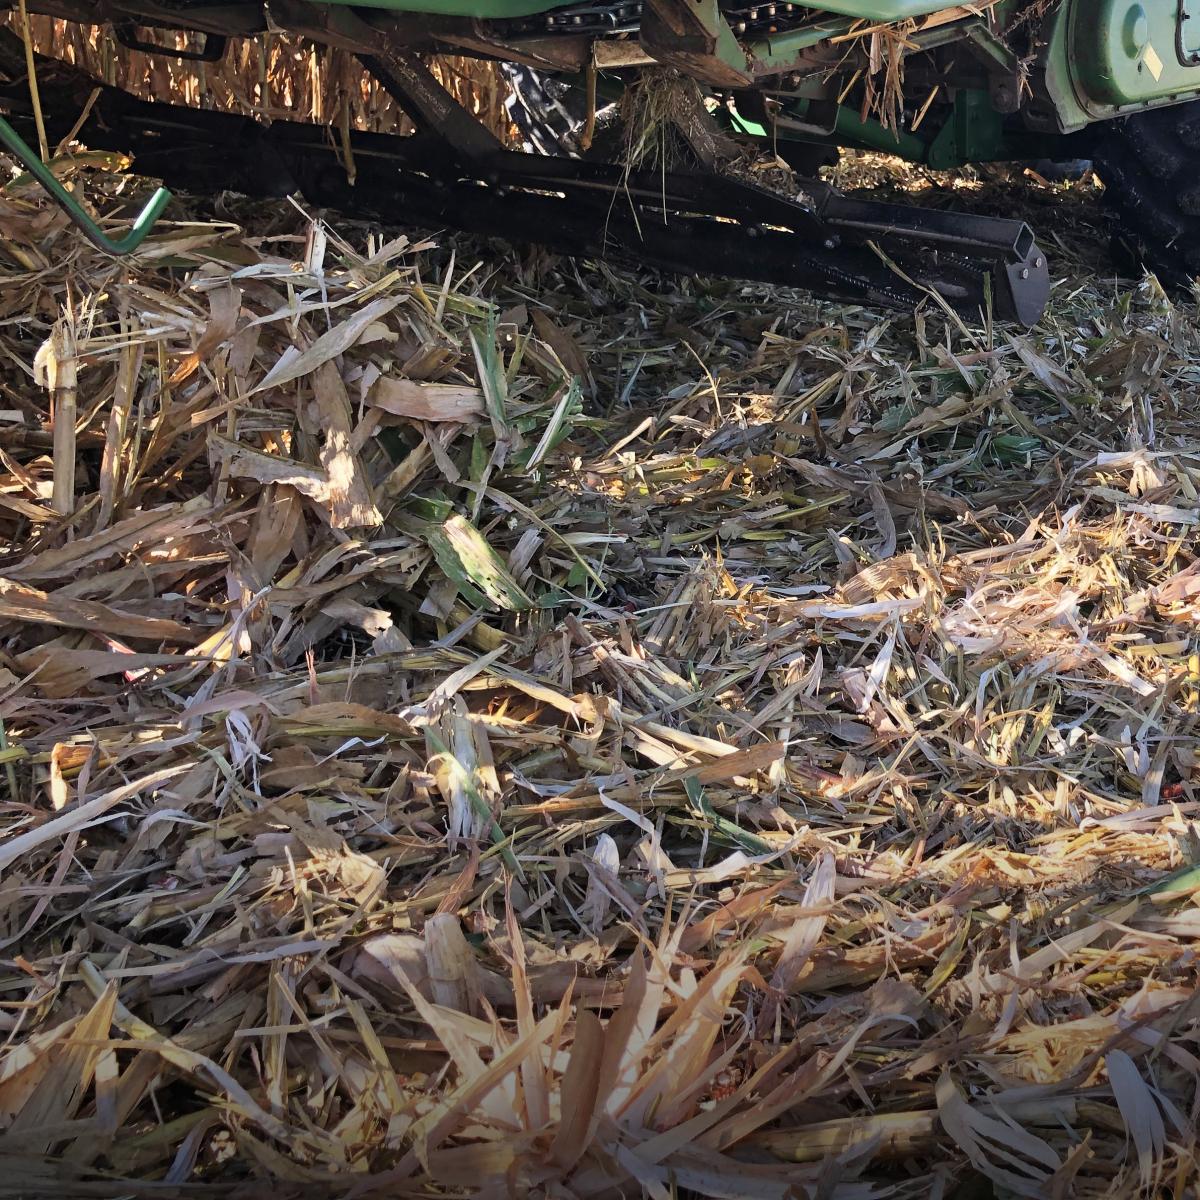 On the left, cornstalks stand before being crimped by the Devastator. Under the head, stalks are knocked over  to touch the ground.